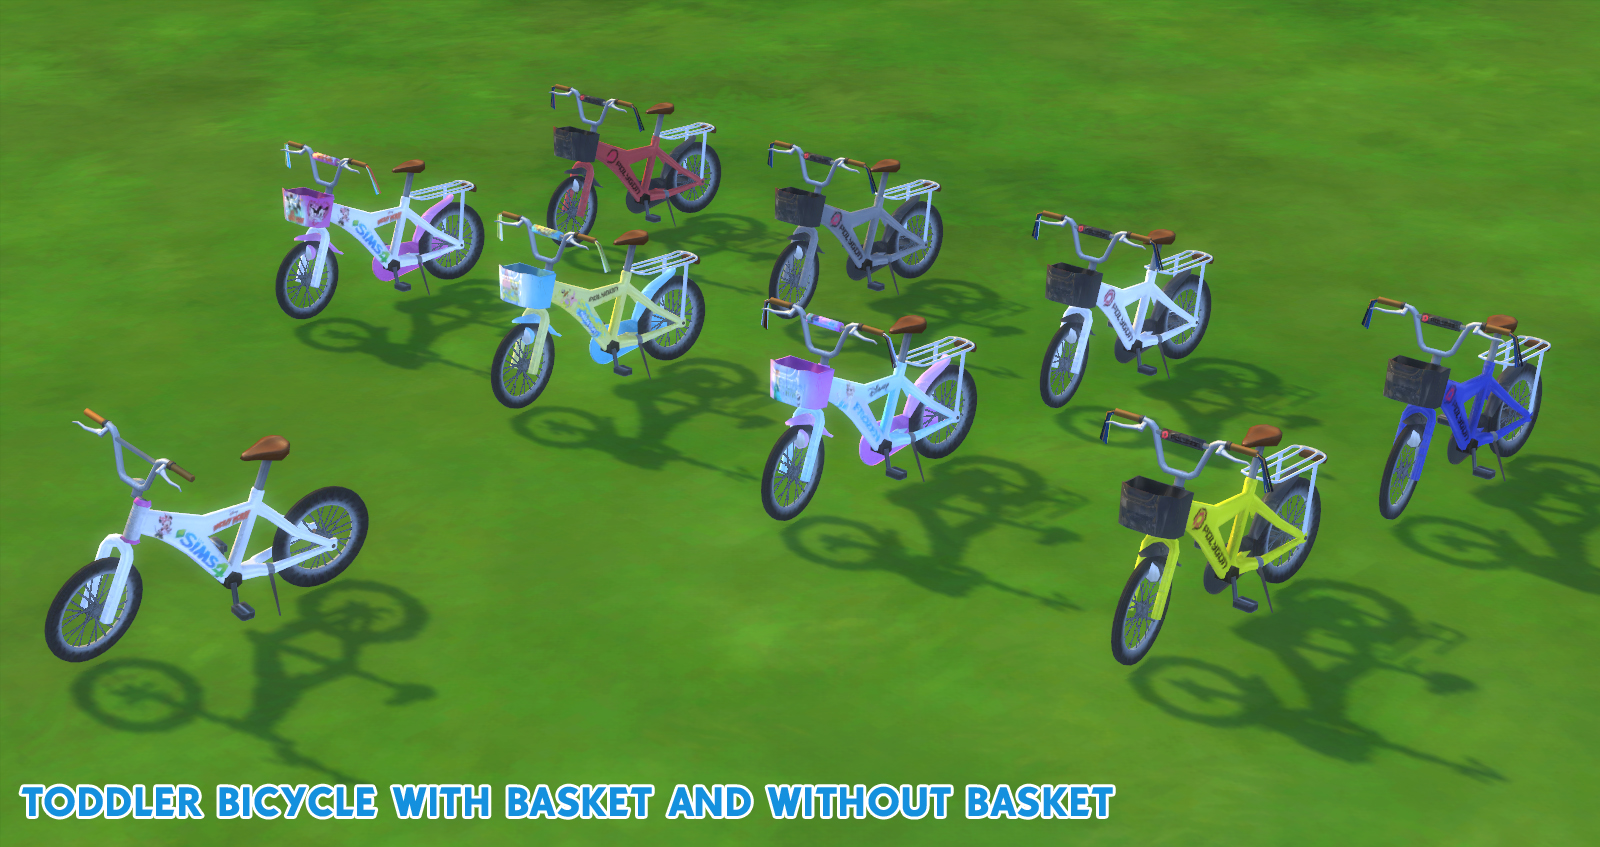 Bicycle For Kids and Toddler by Waronk at Mod The Sims 4 » Sims 4 Updates